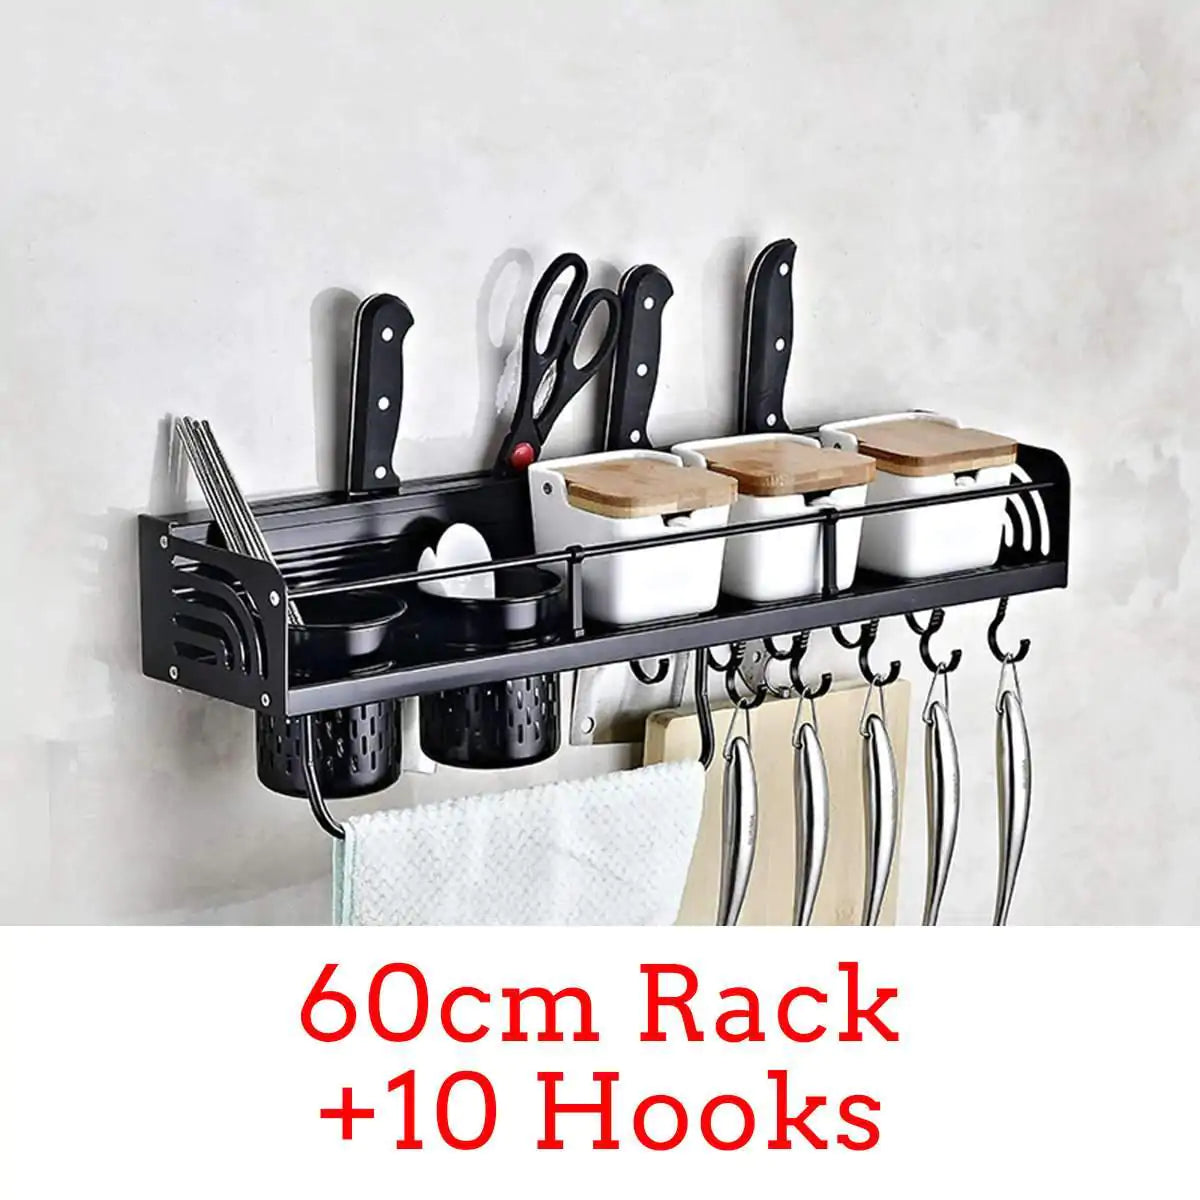 Wall-Mounted Kitchen Rack: Durable, Stylish, Saves Space!